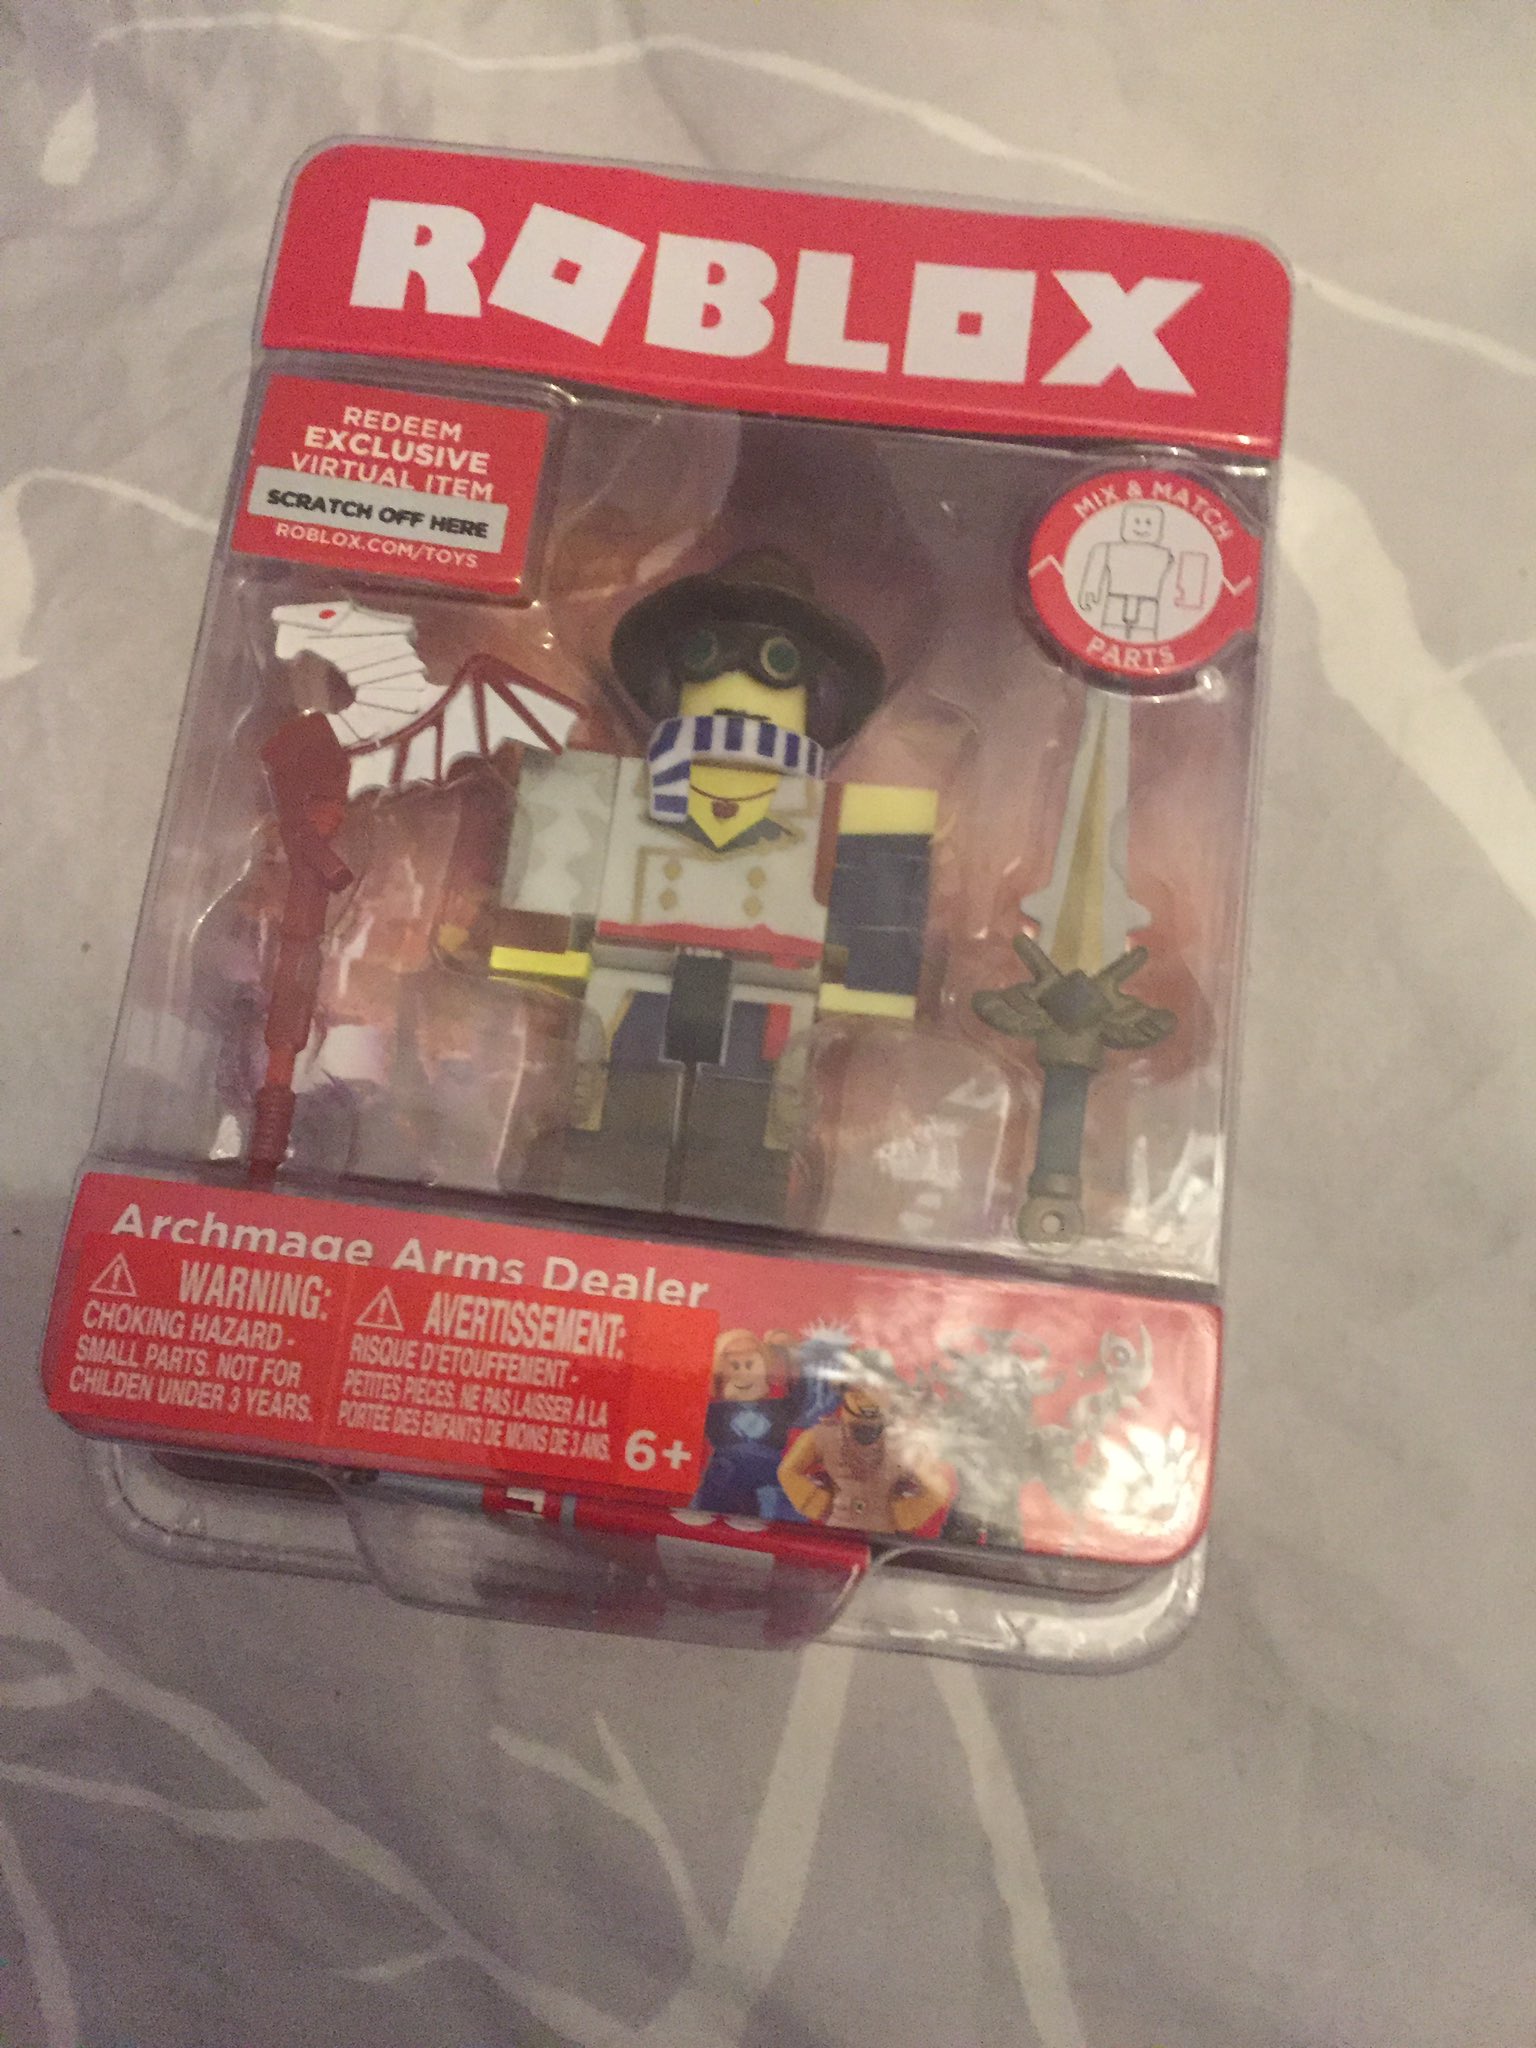 Tanookialex V Twitter Roblox Toy Code Giveaway Follow These Steps 1 Subscribe To My Youtube Channel Https T Co Cjwj8vg62y If You Have Your Subscriptions Set To Private Please Dm Me Proof 2 Retweet - roblox toys toronto